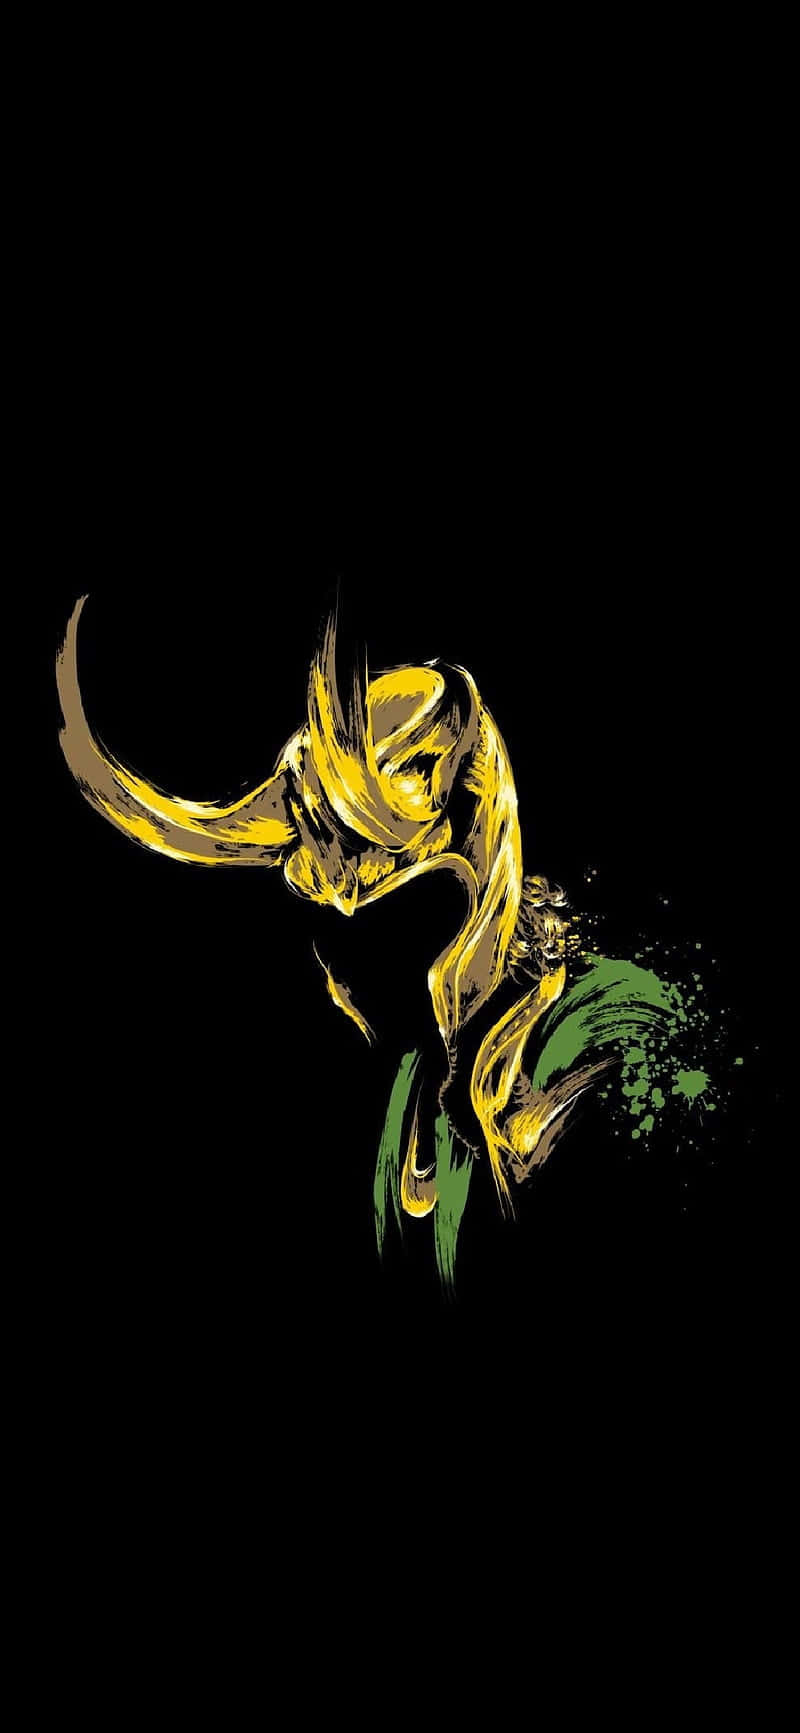 Marvel's Loki proclaiming his power and dominance. Wallpaper